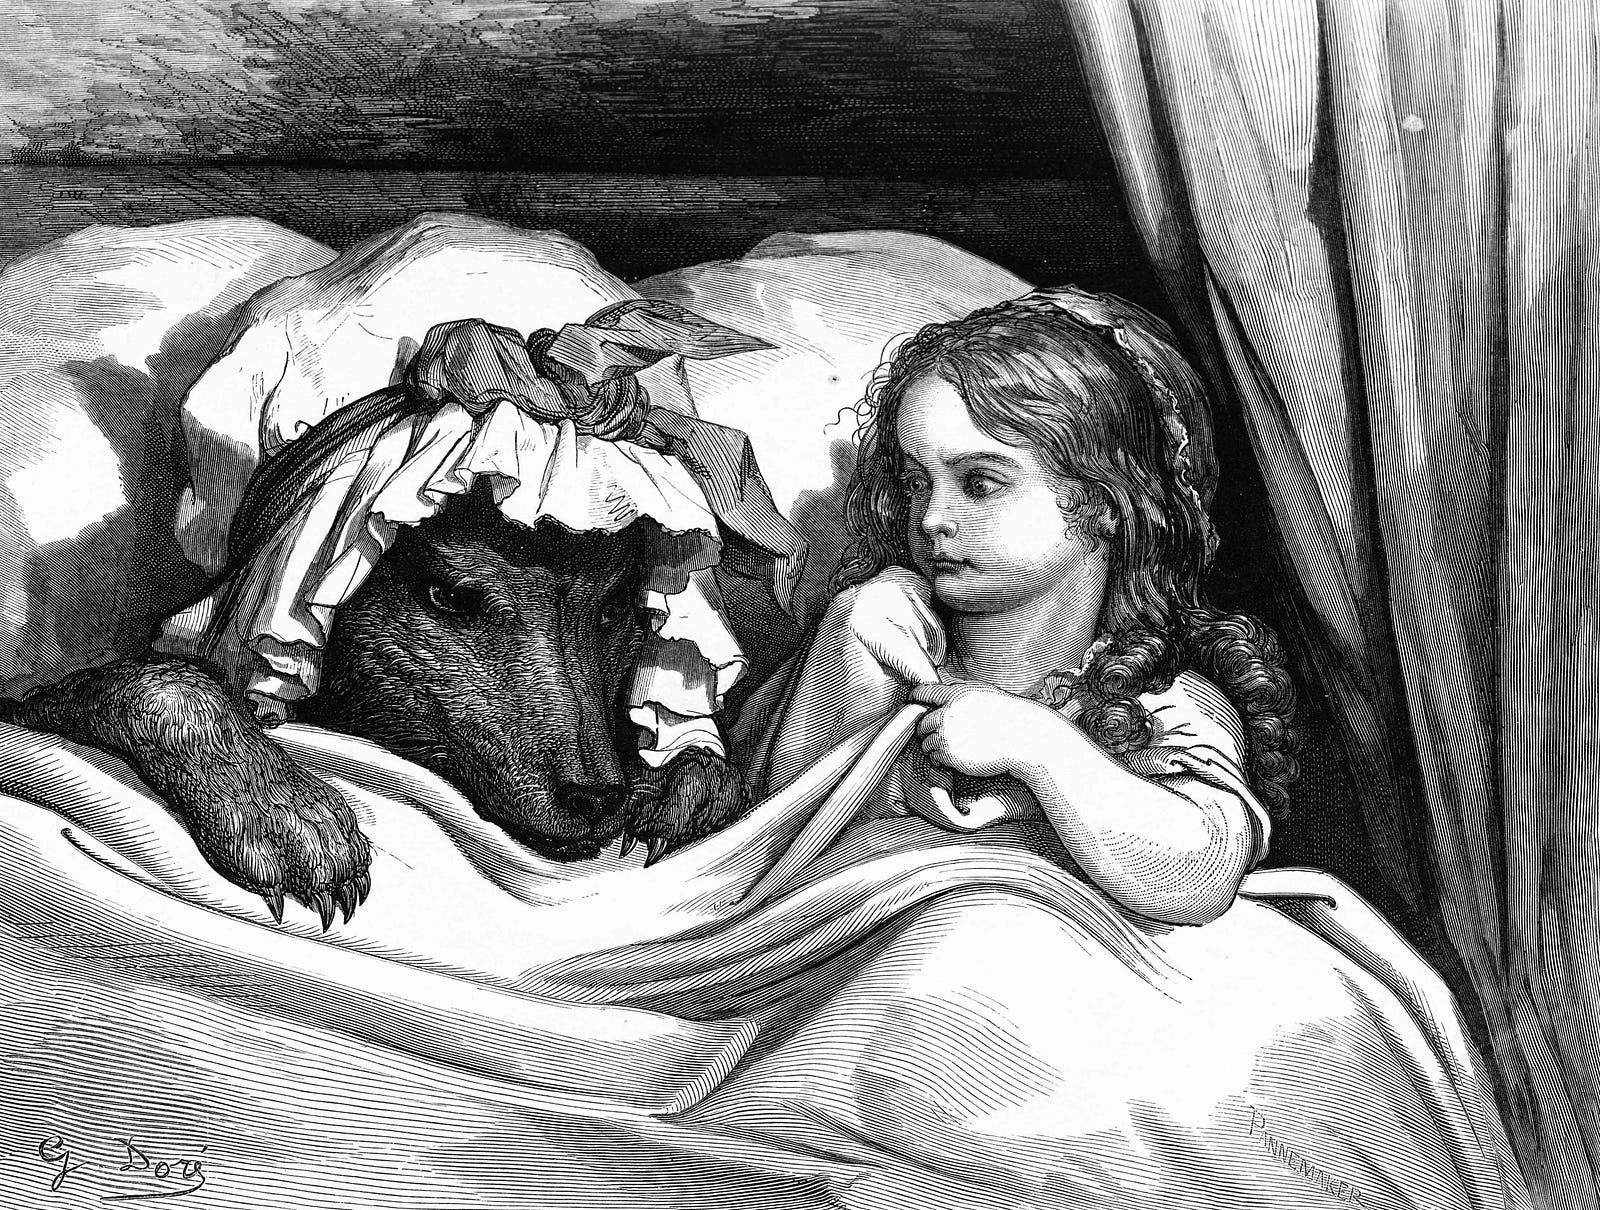 “Little Red Riding Hood,” illustrated by Gustave Doré, via Tulane University.